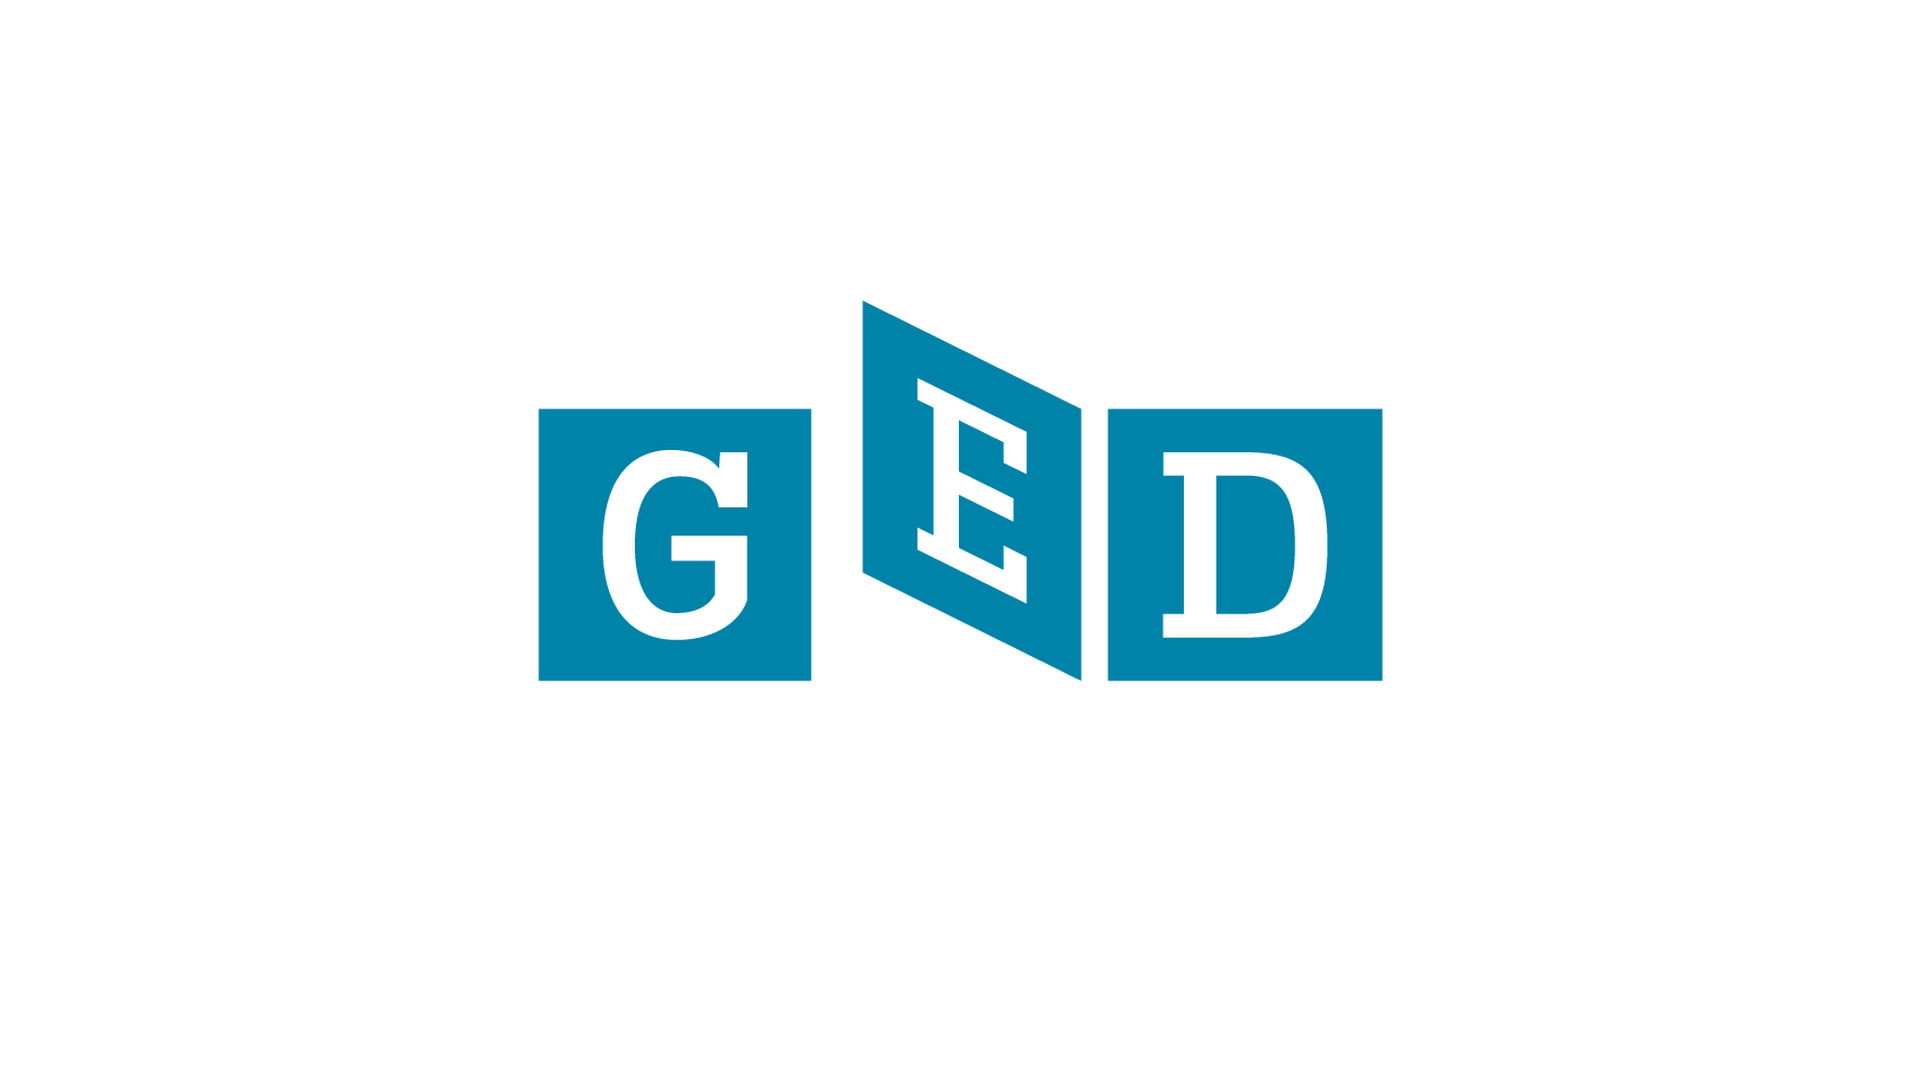 ged practice test